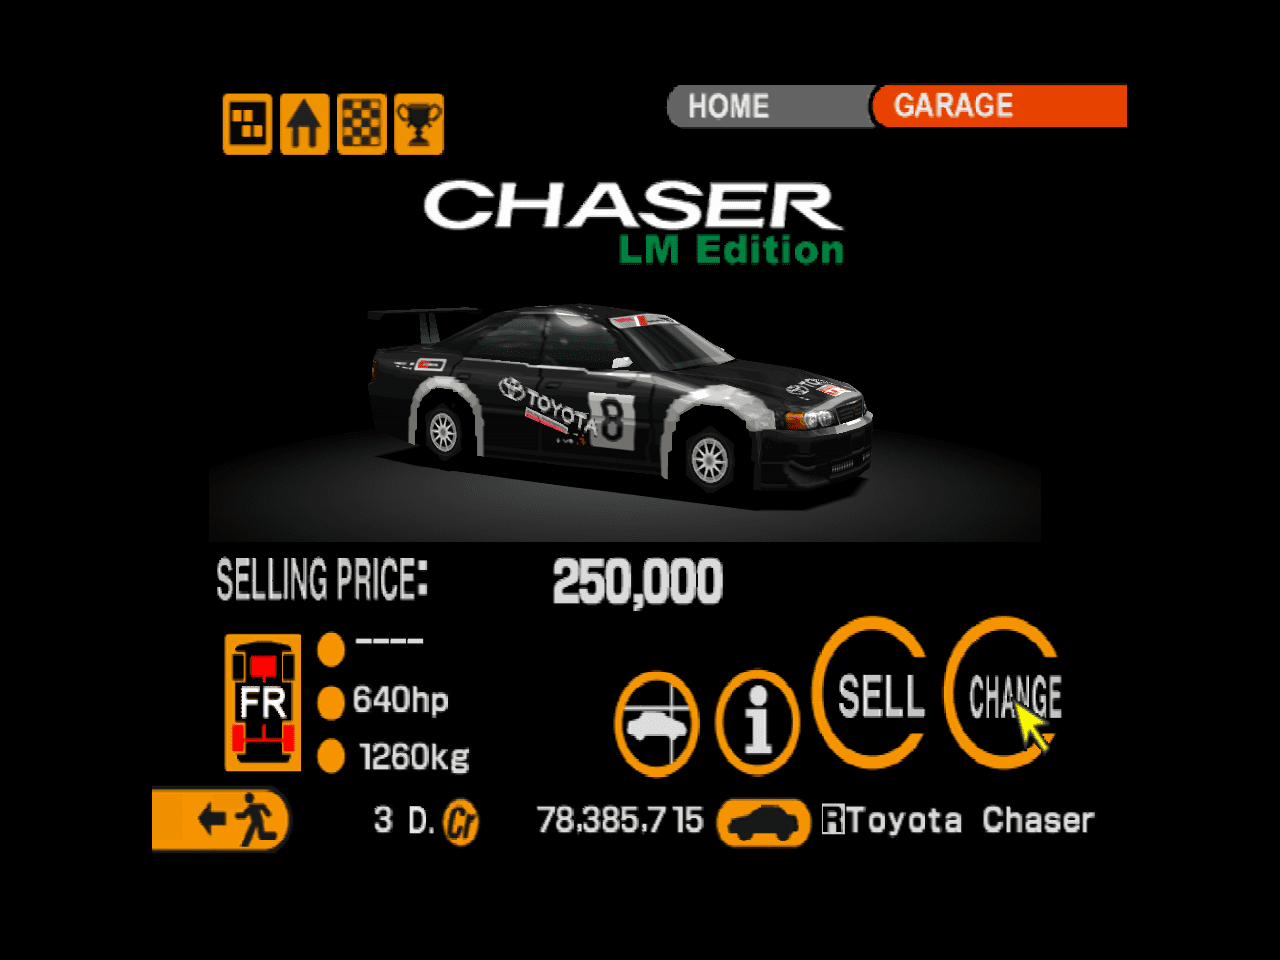 chaserlm-garage.png